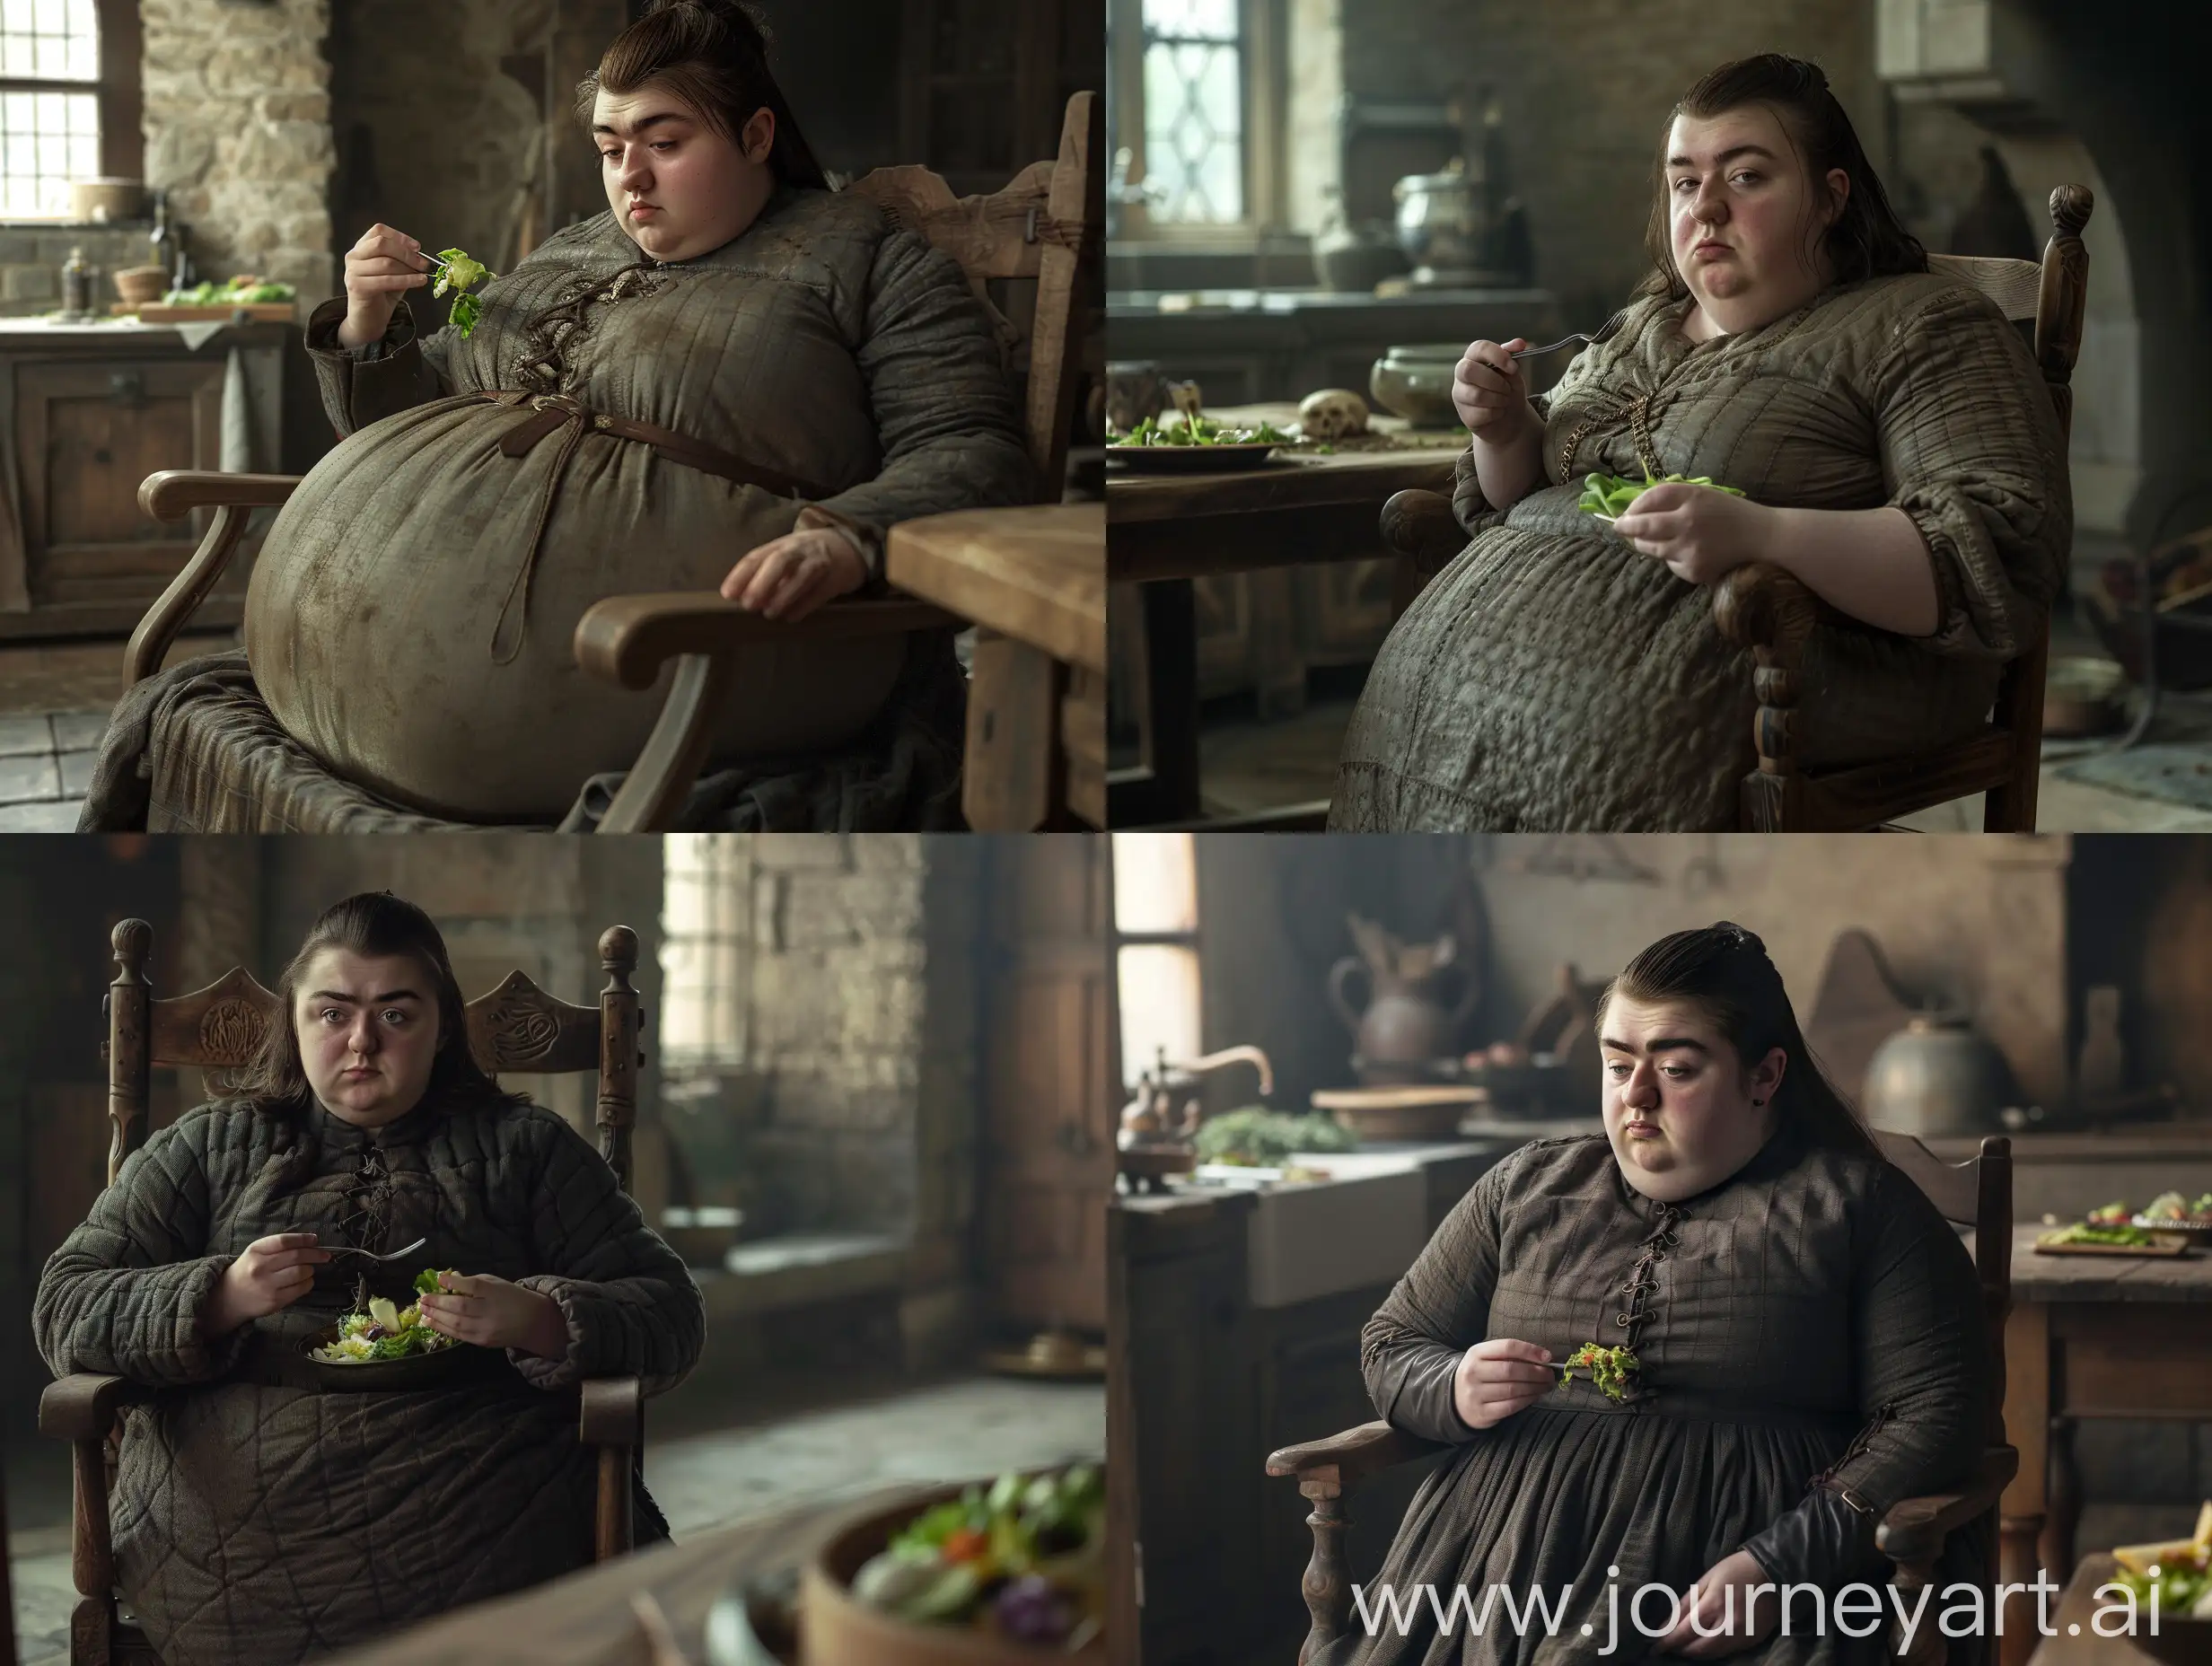 Arya Stark is in the Game of Thrones series, Arya Stark with a rounder body, Arya Stark is very very fat, Arya Stark's face and body are very fat, Arya Stark is sitting on a wooden chair in the kitchen of Winterfell Palace, Arya Stark is holding a fork is eating salad, Arya Stark is not looking at the camera, the camera shows a fat Arya Stark from a distance in a three-quarter profile, the style of The Witcher, the lighting is classic, realistic, q2